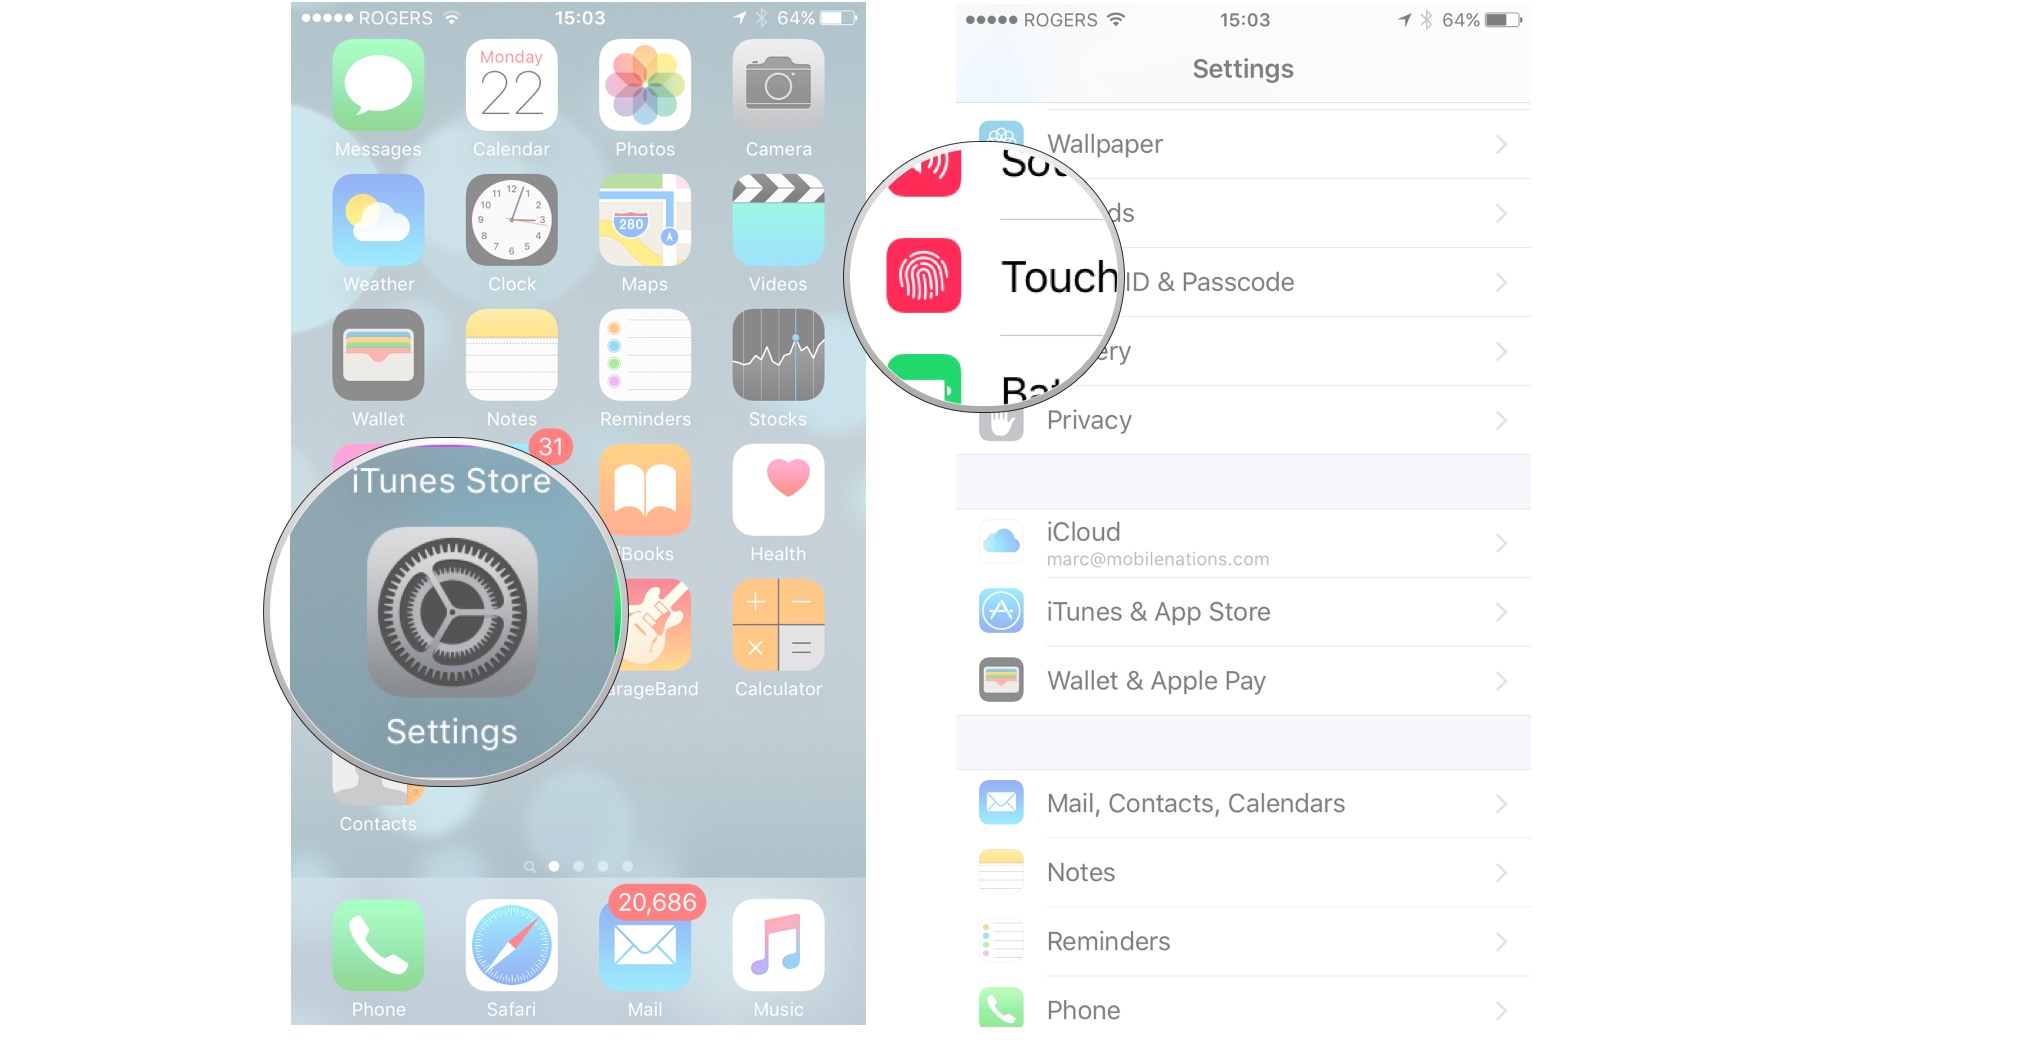 tap settings, then tap touch id and passcode